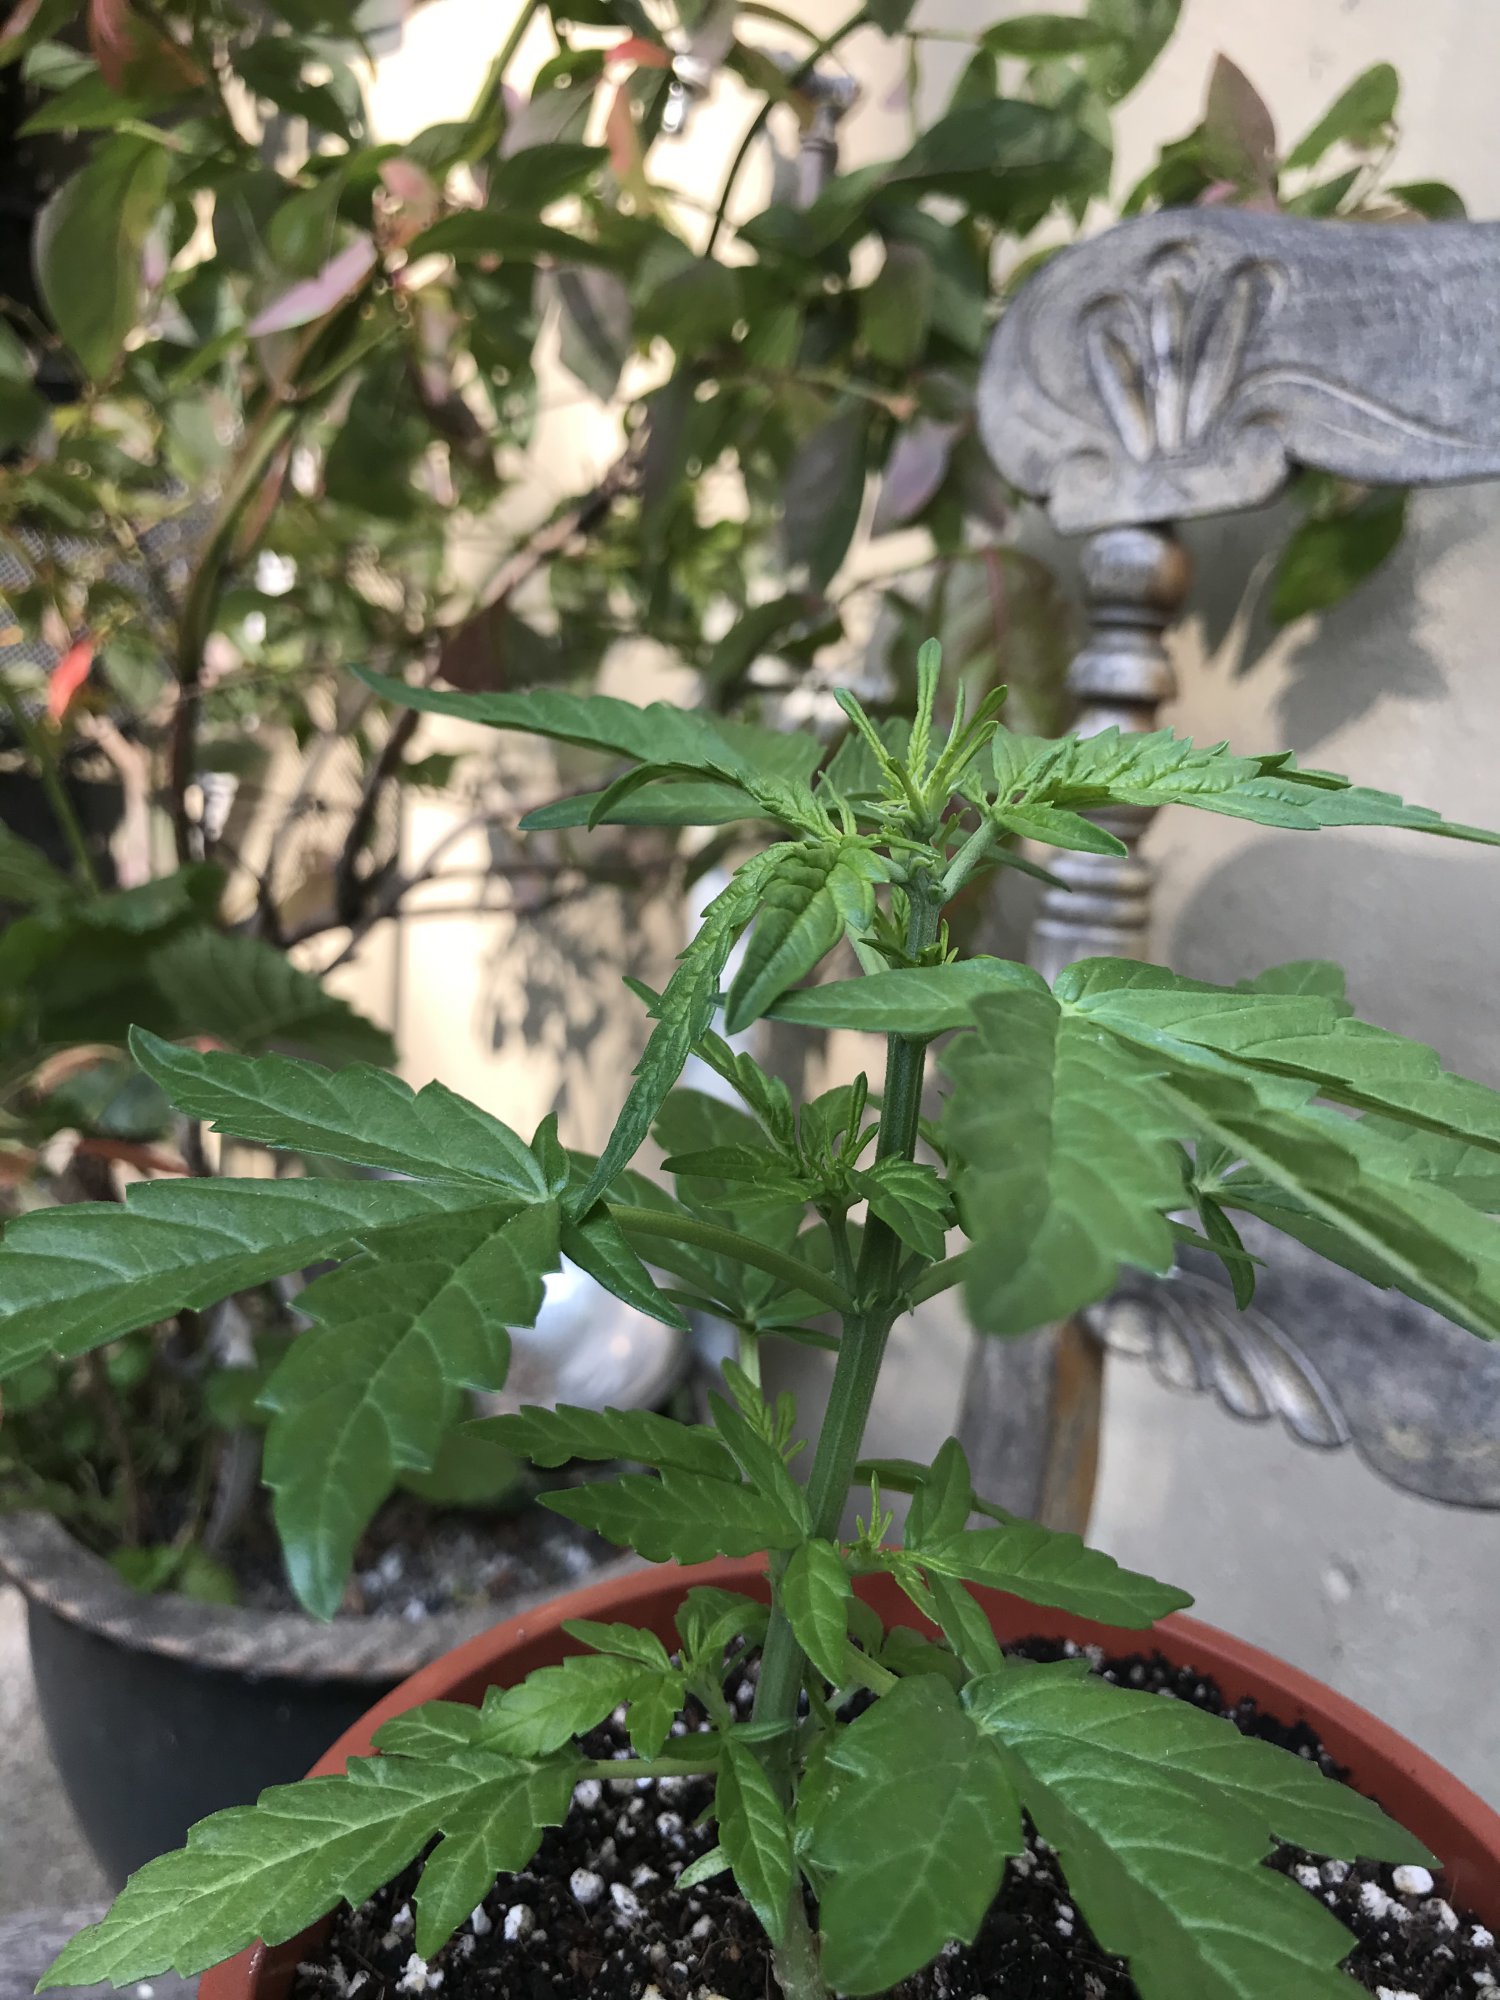 Totally confused by my plants doing odd things and there is a quick spreading deficiency too 